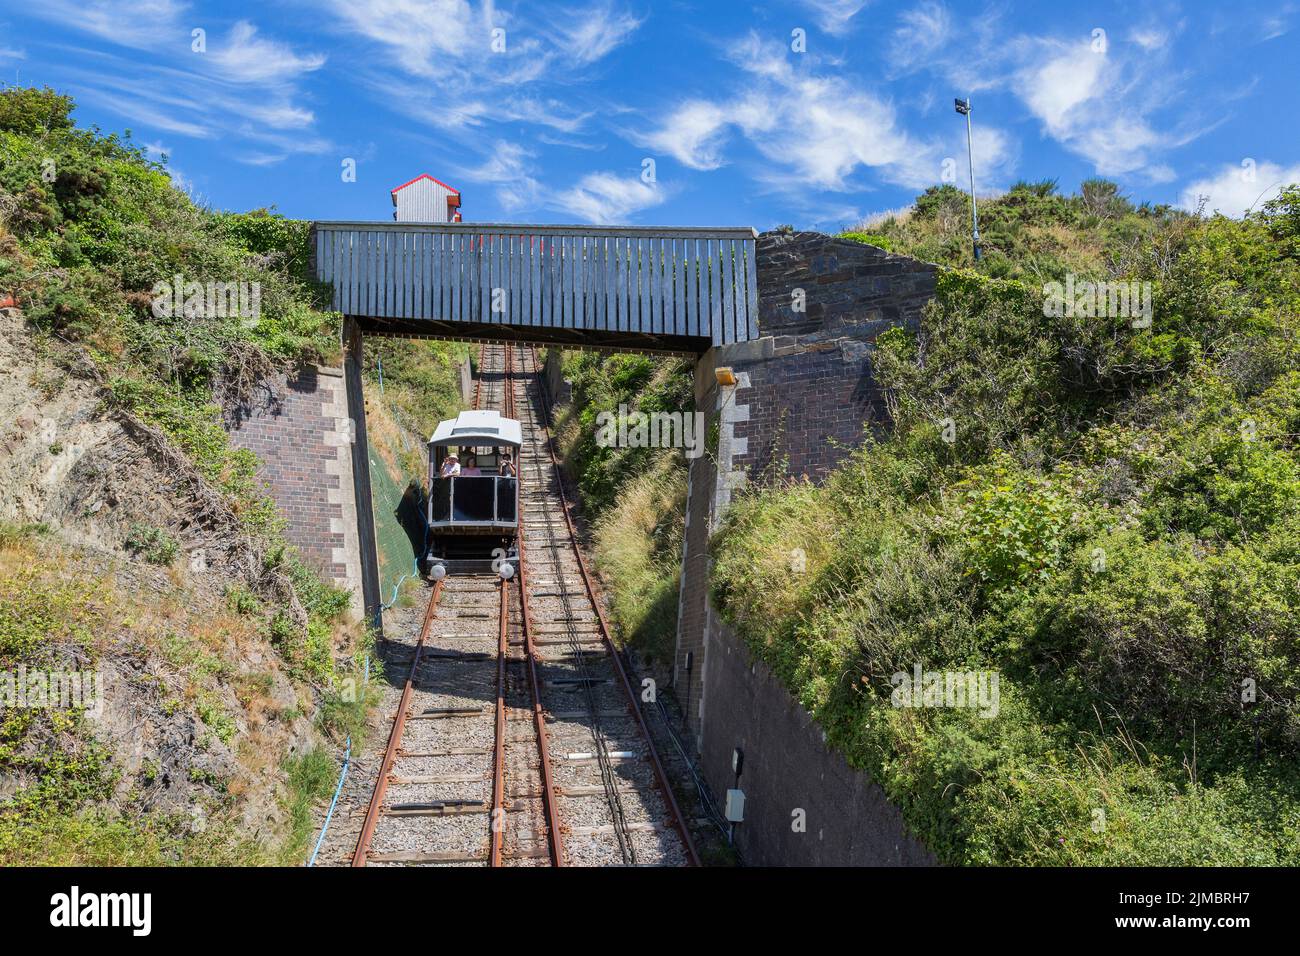 Aberyswyth Cliff Railway - A train carriage makes it's way up Constitution Hill on the longest funicular electric cliff railway in Britain. Stock Photo